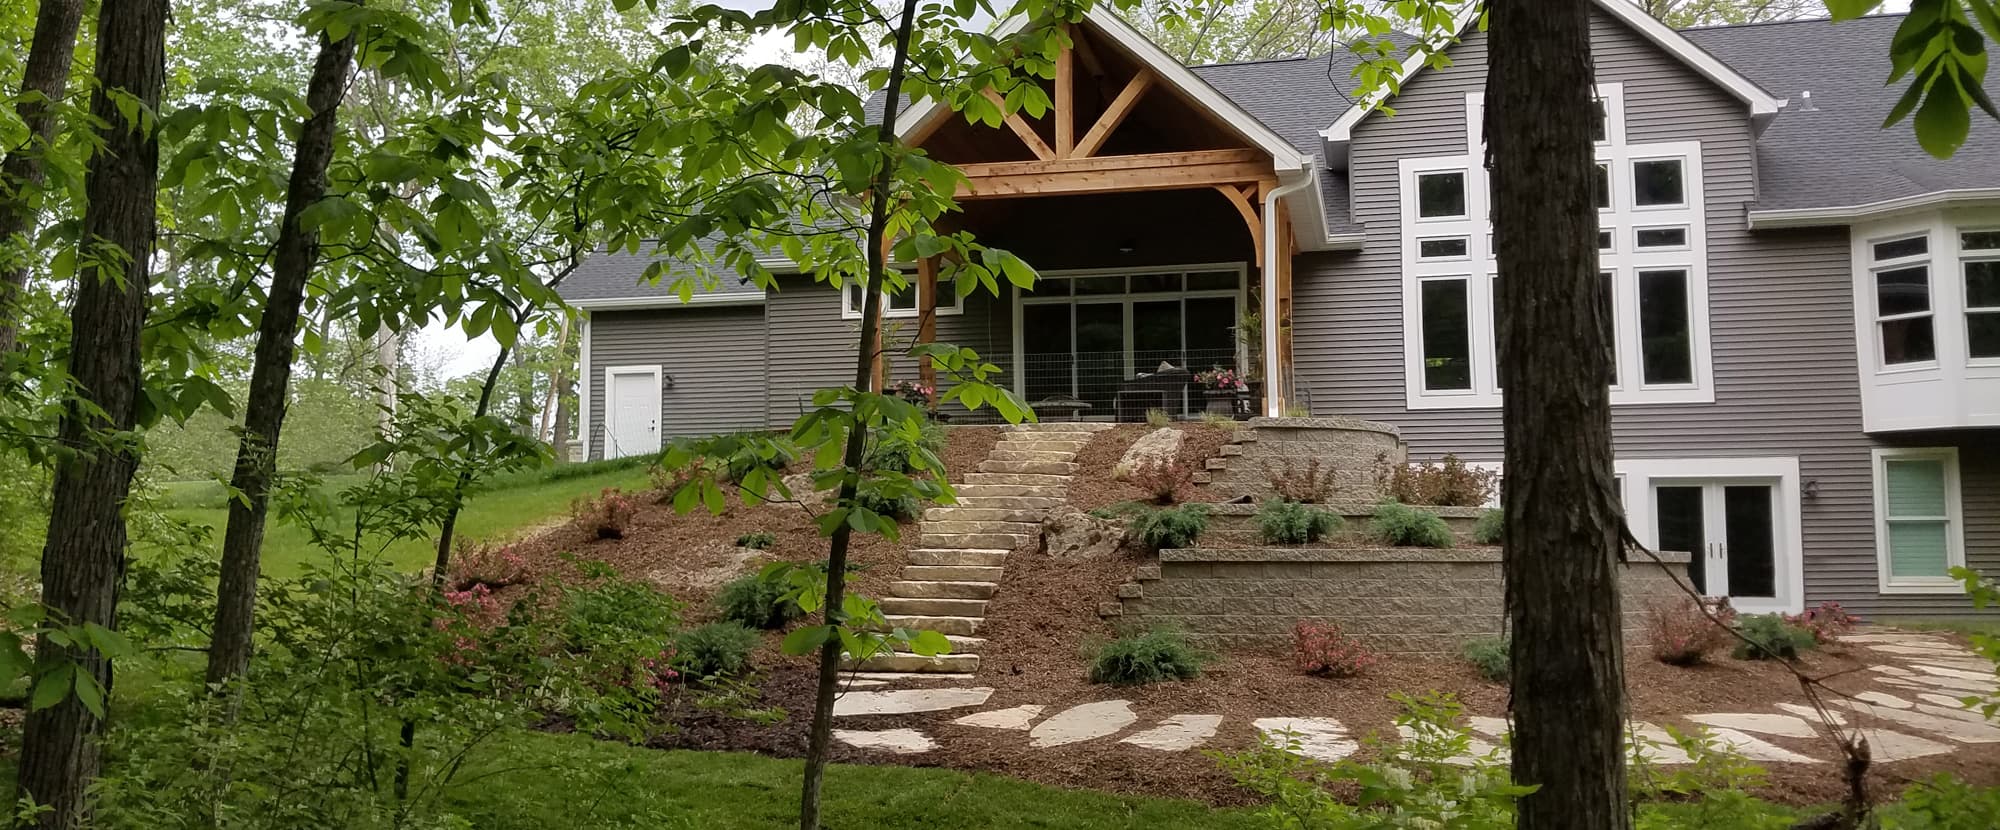 St. Louis Landscaping Company